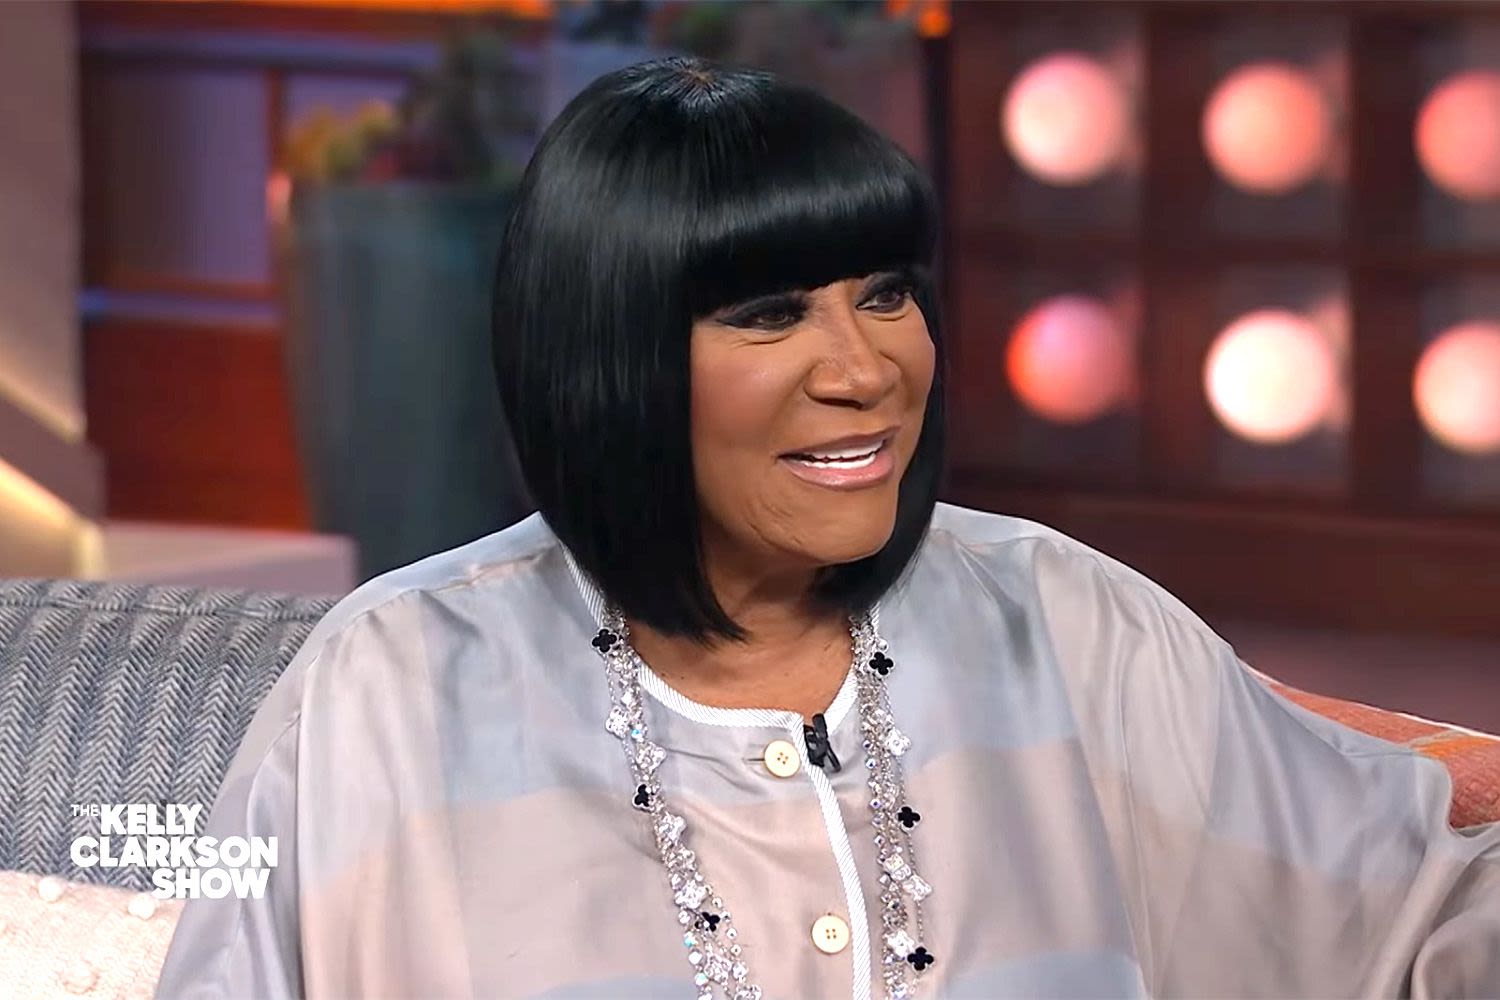 Patti LaBelle Says She Got Mooned Onstage During a 'Lady Marmalade' Performance: 'I Kicked His Butt'